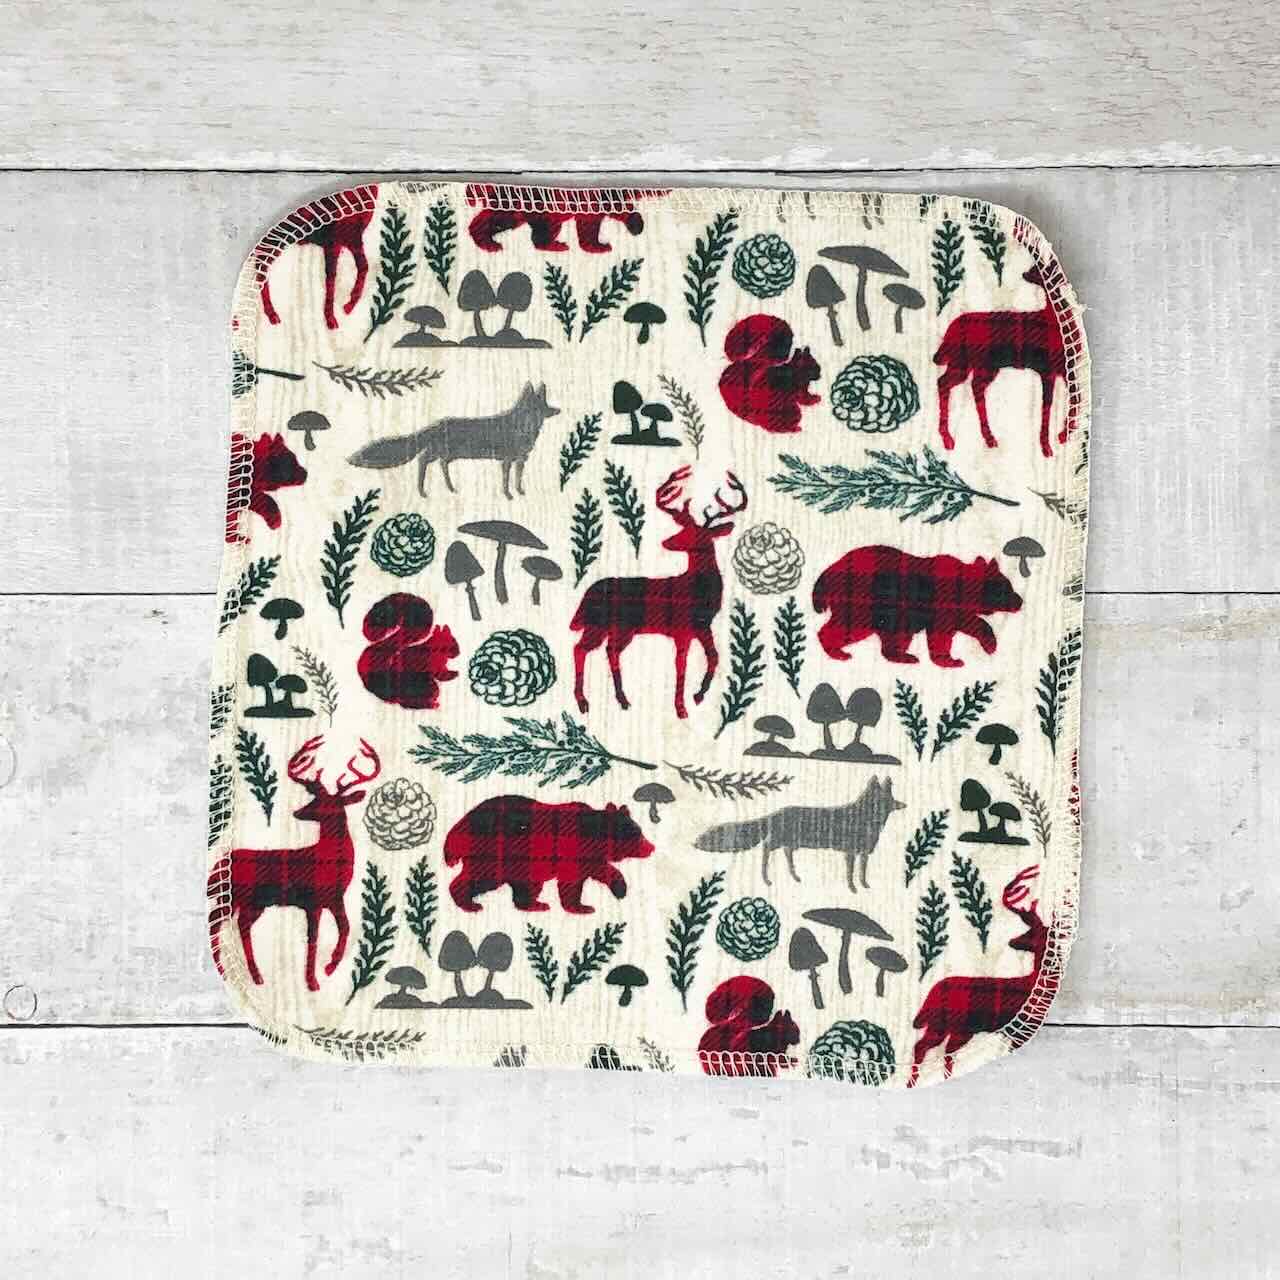 flat lay of a set of 10 reusable cloth wipes, with vintage woodland animals like bears, foxes and dears printed on the fabric.